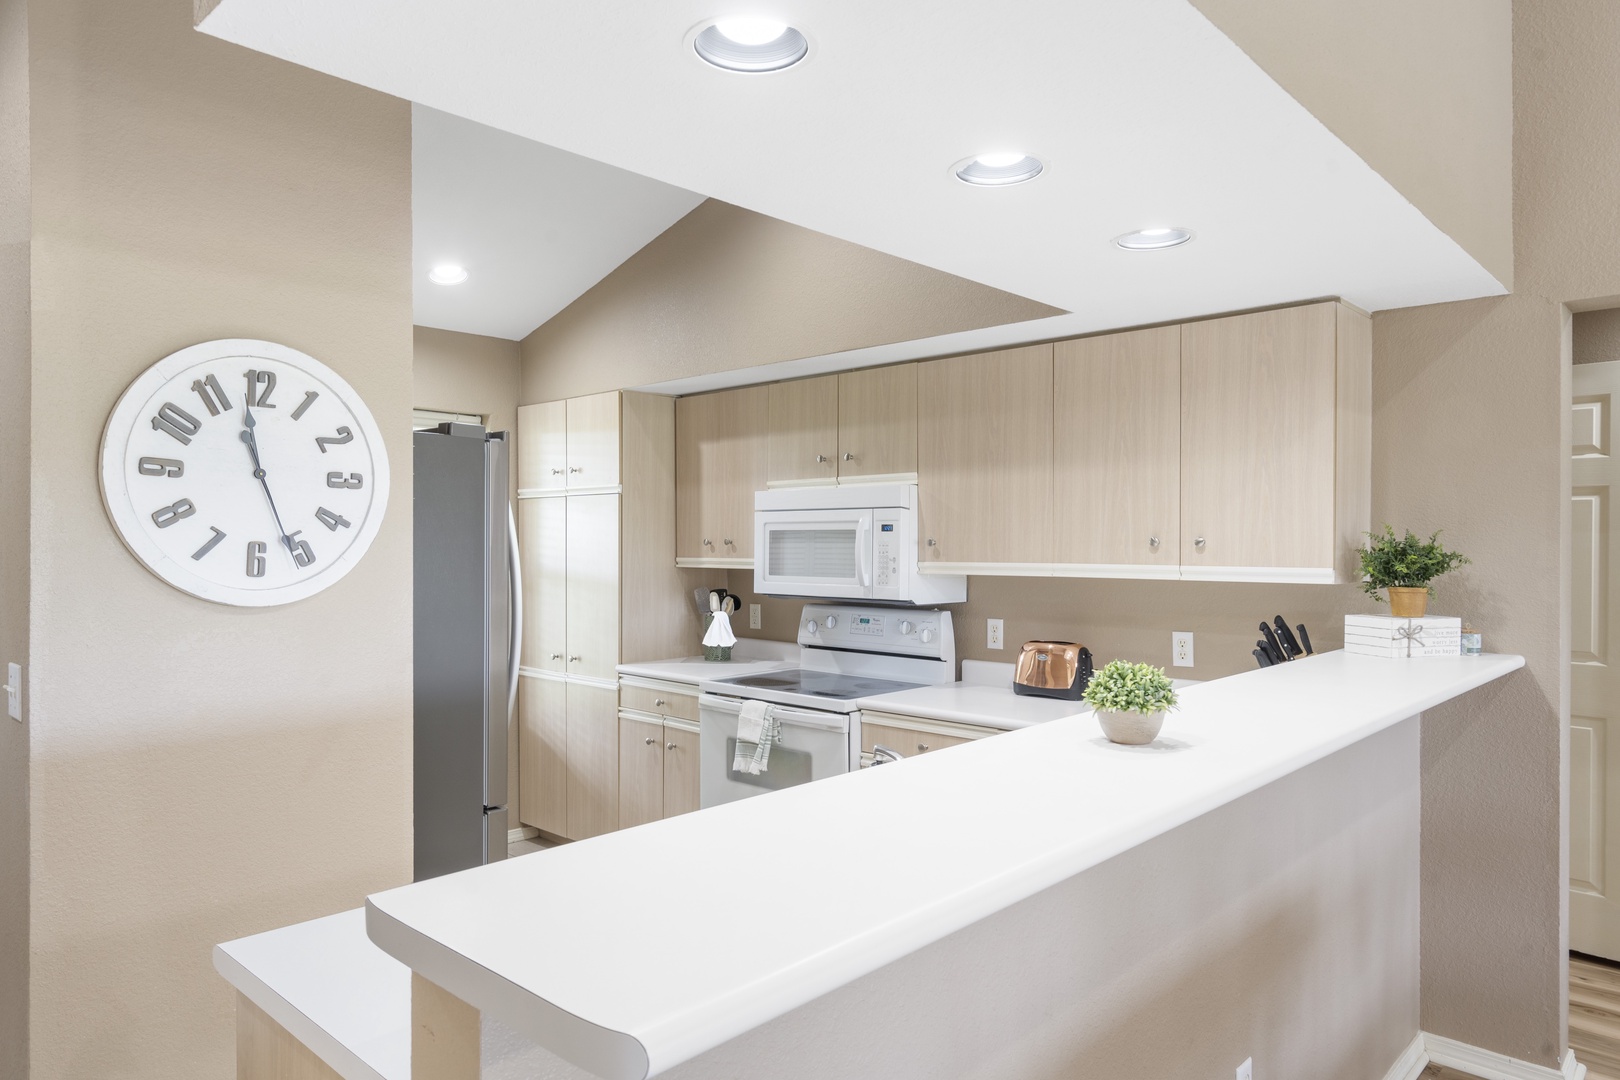 Fully equipped kitchen with spacious countertops for prepping  your meals